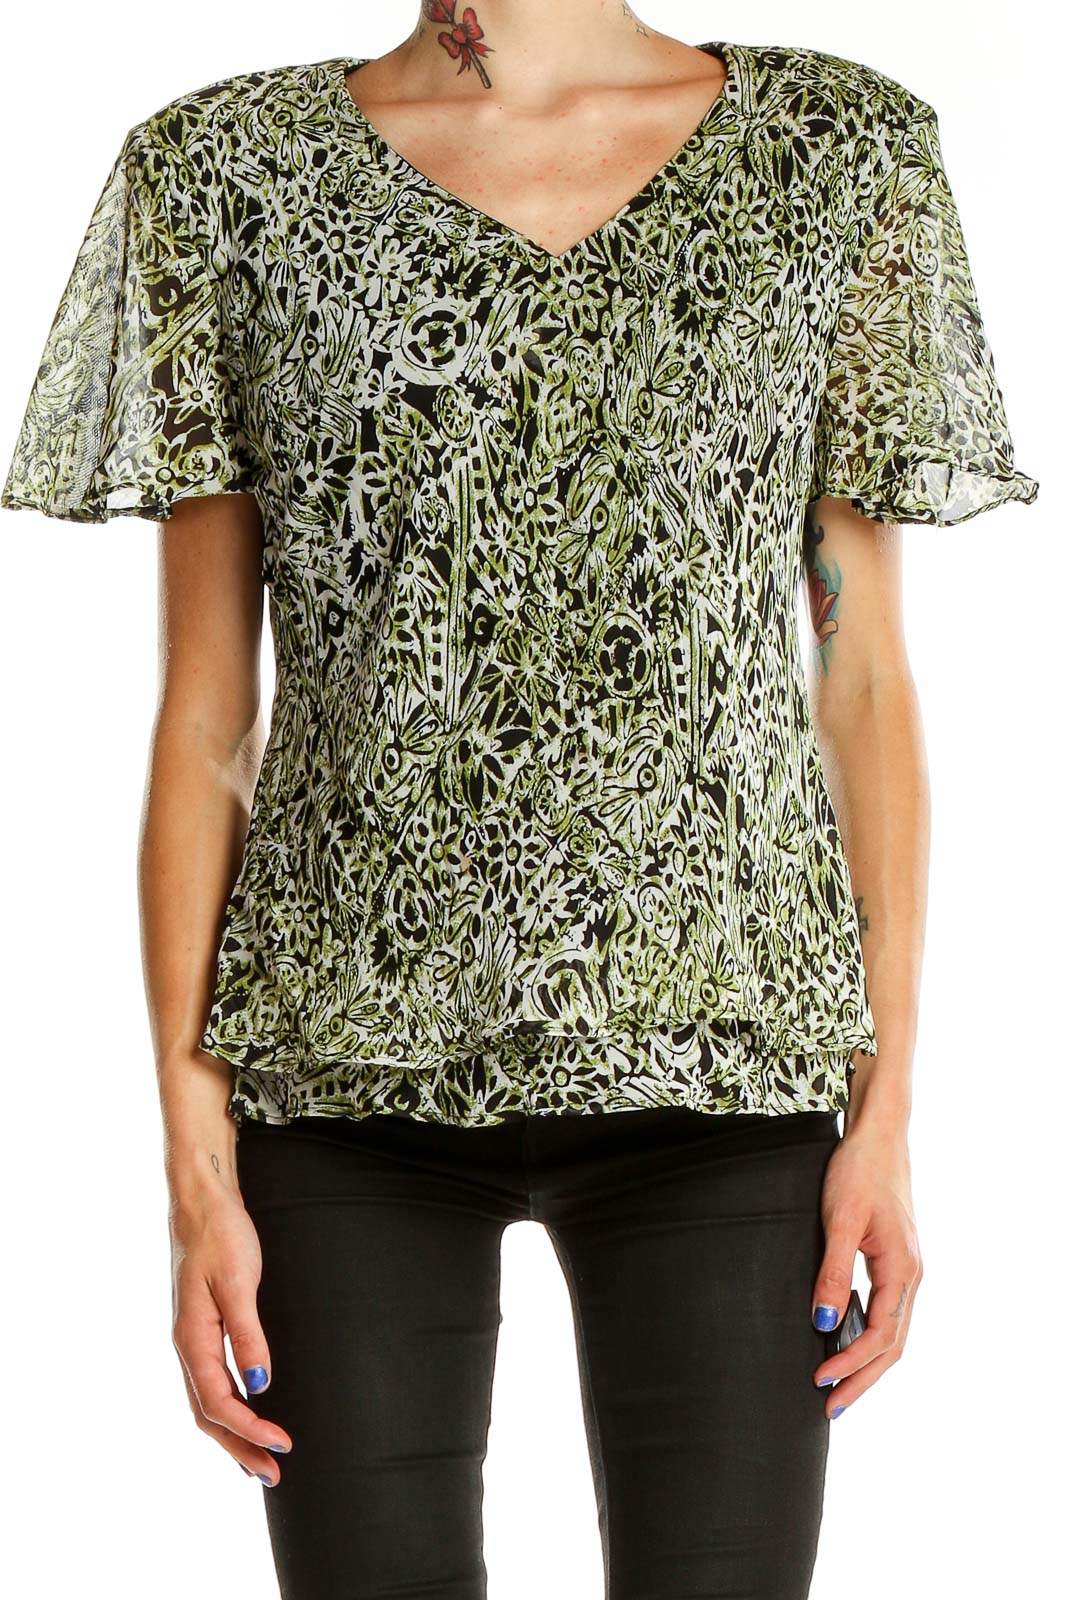 Green Printed Retro Blouse Front